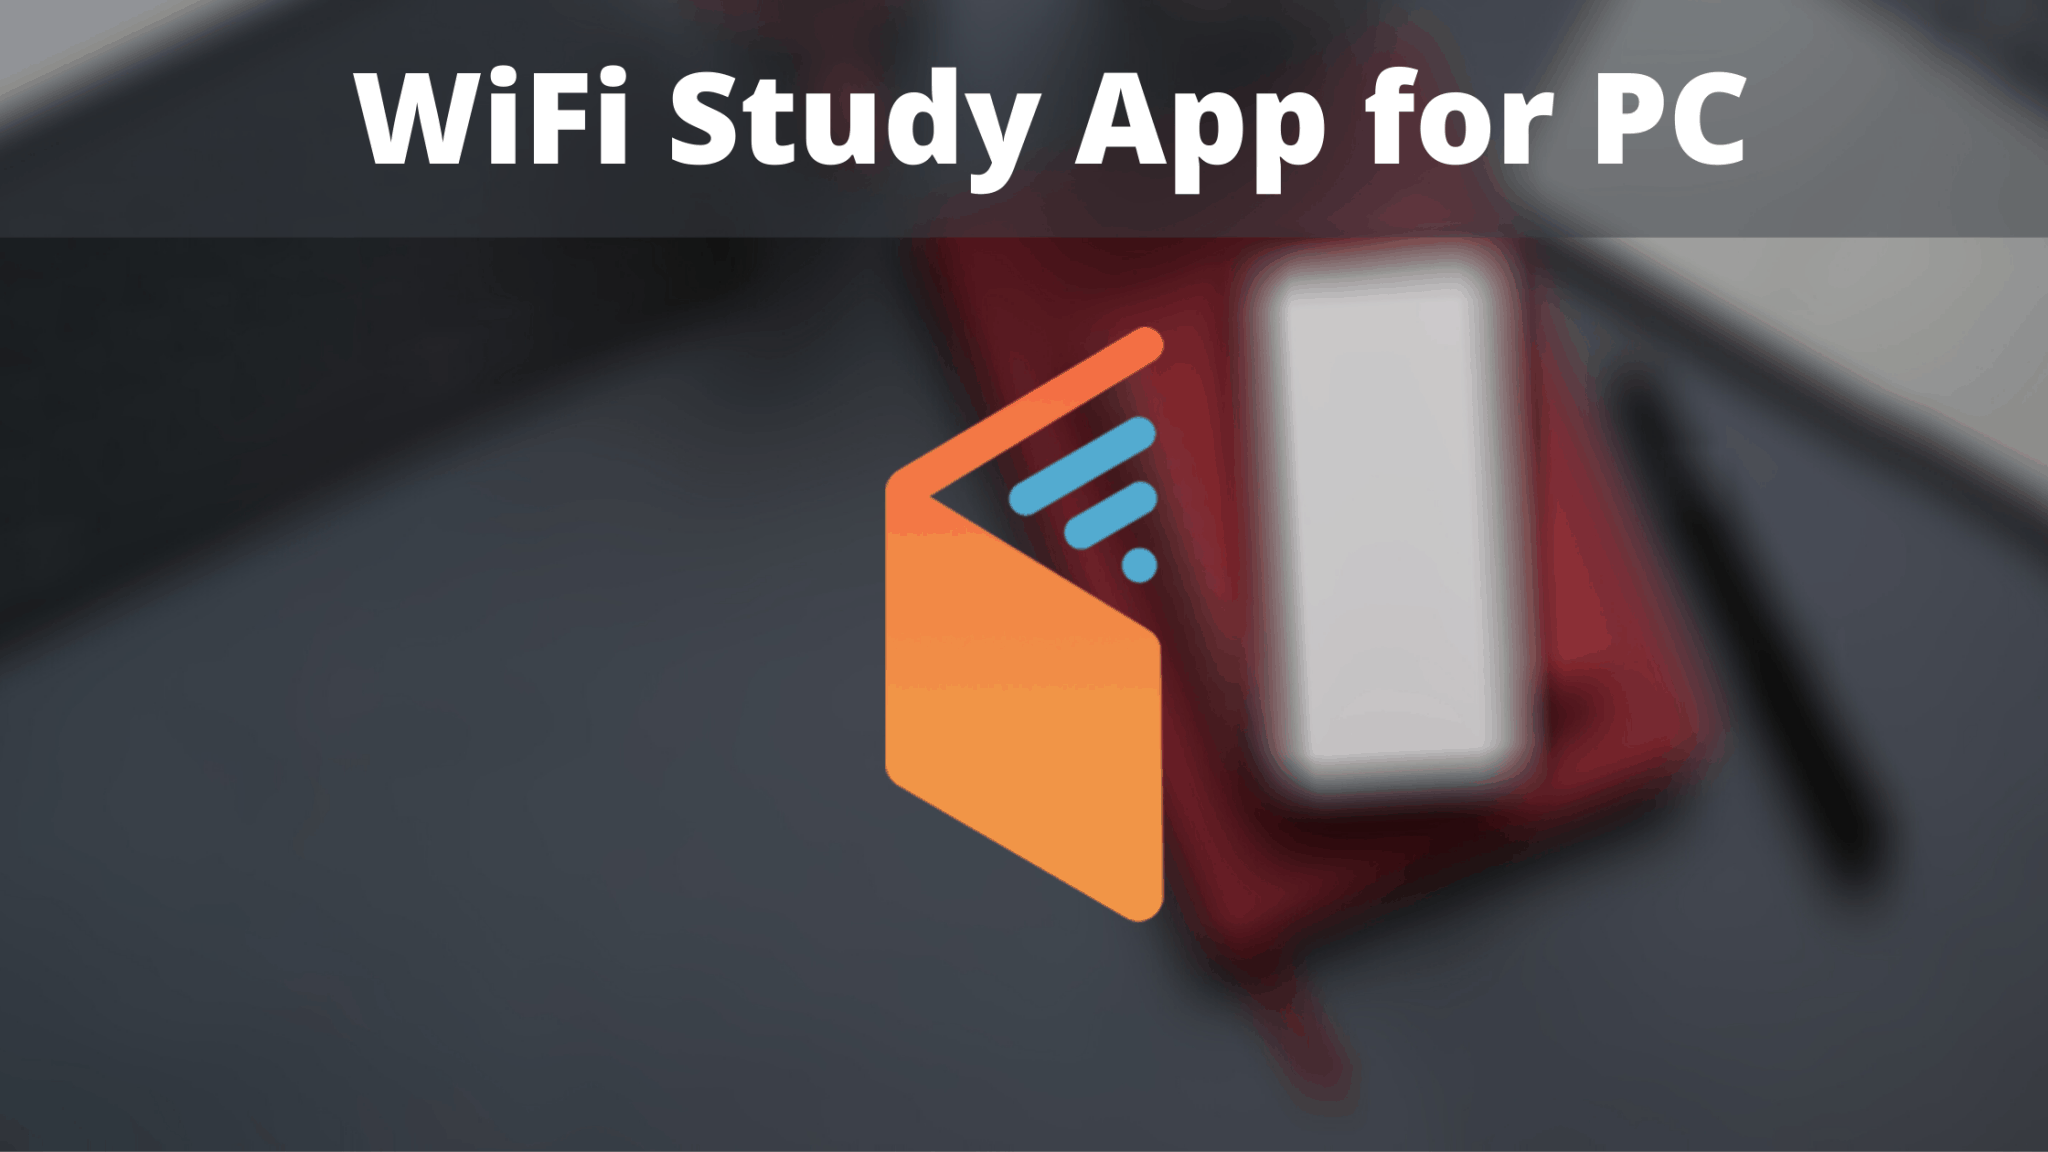 wifistudy app for pc